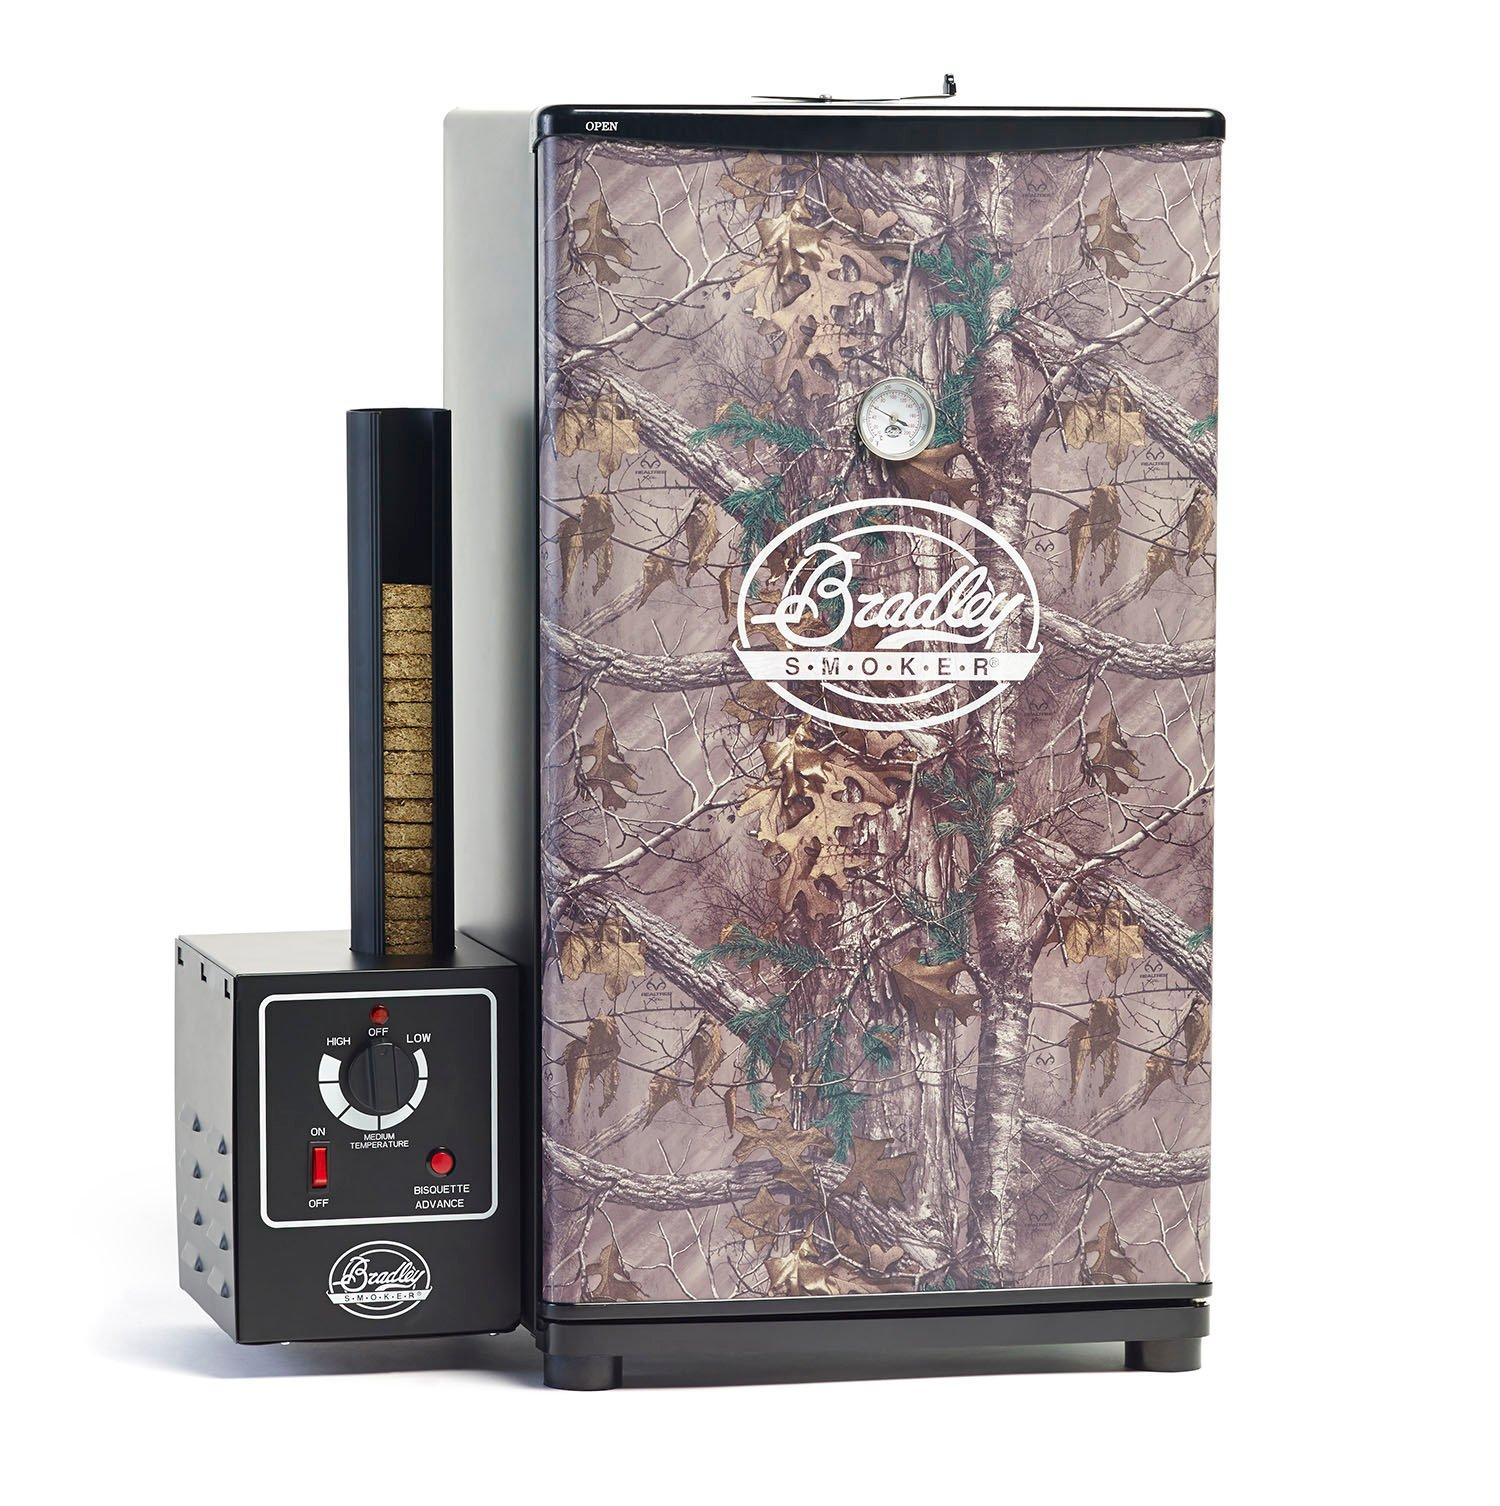 Fully insulated with settings that allow smoke, heat, or a combination, the Bradley Realtree Smoker is perfect for the BBQ lover on your list.